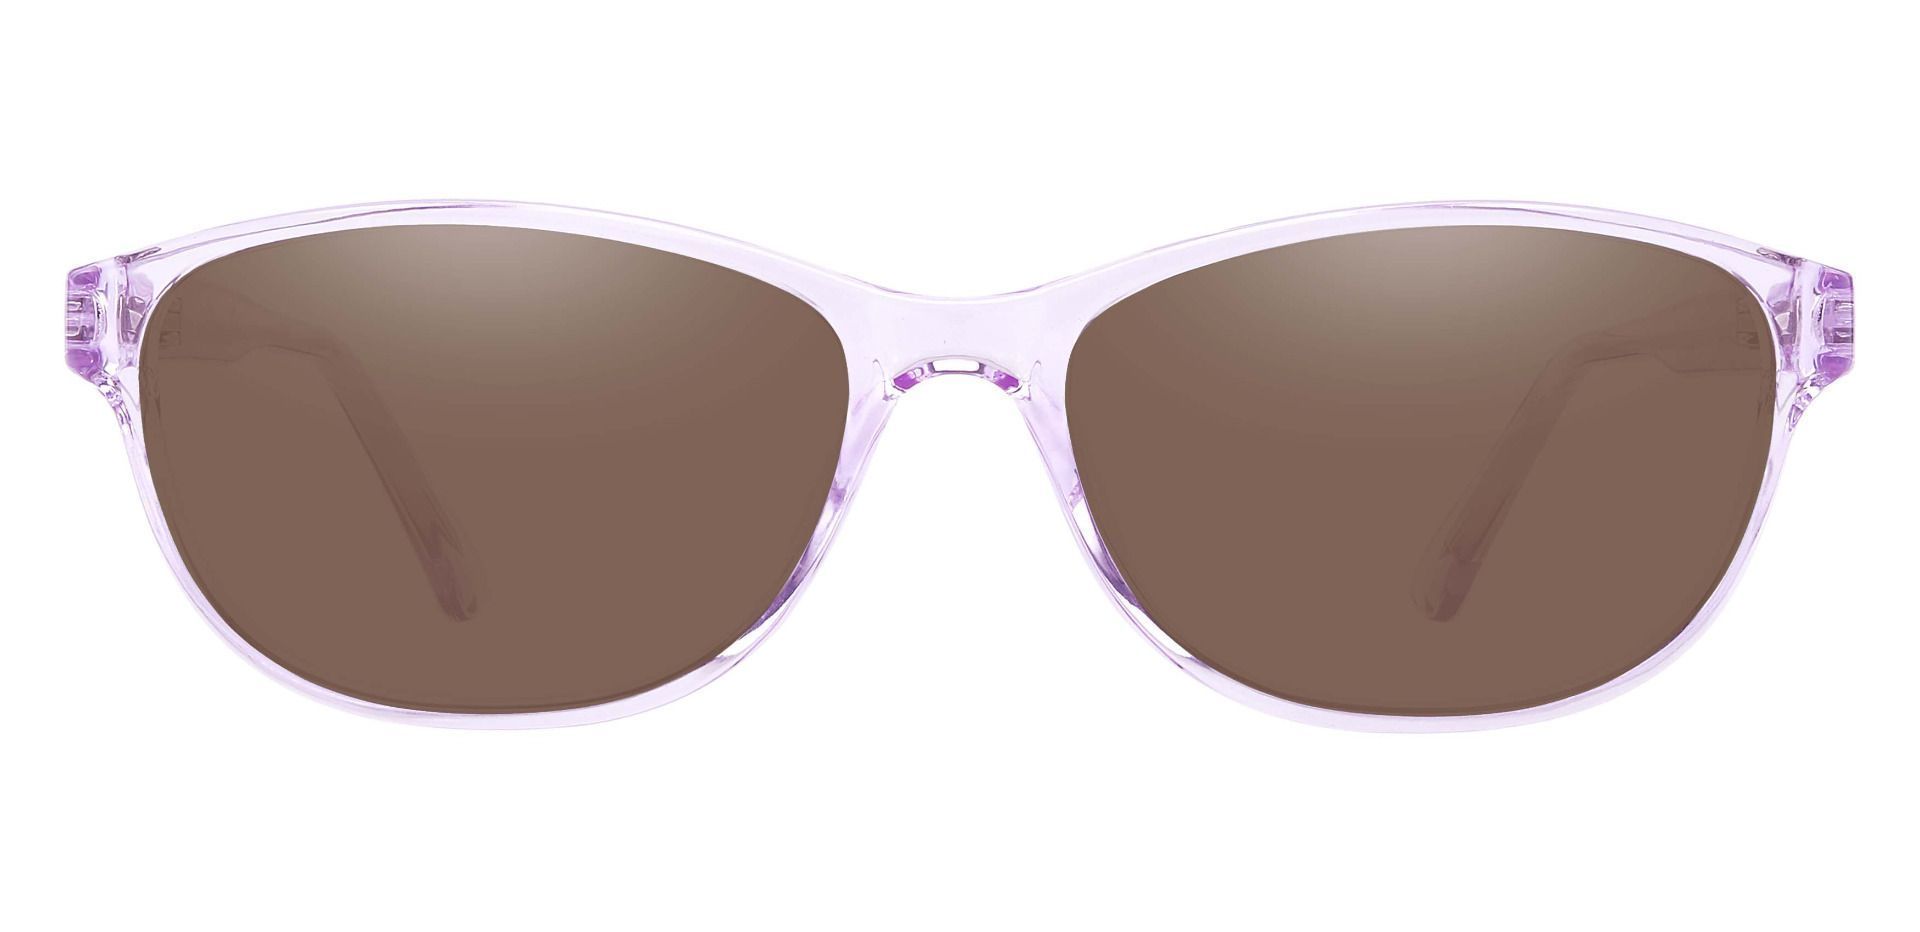 Patsy Oval Prescription Sunglasses - Purple Frame With Brown Lenses